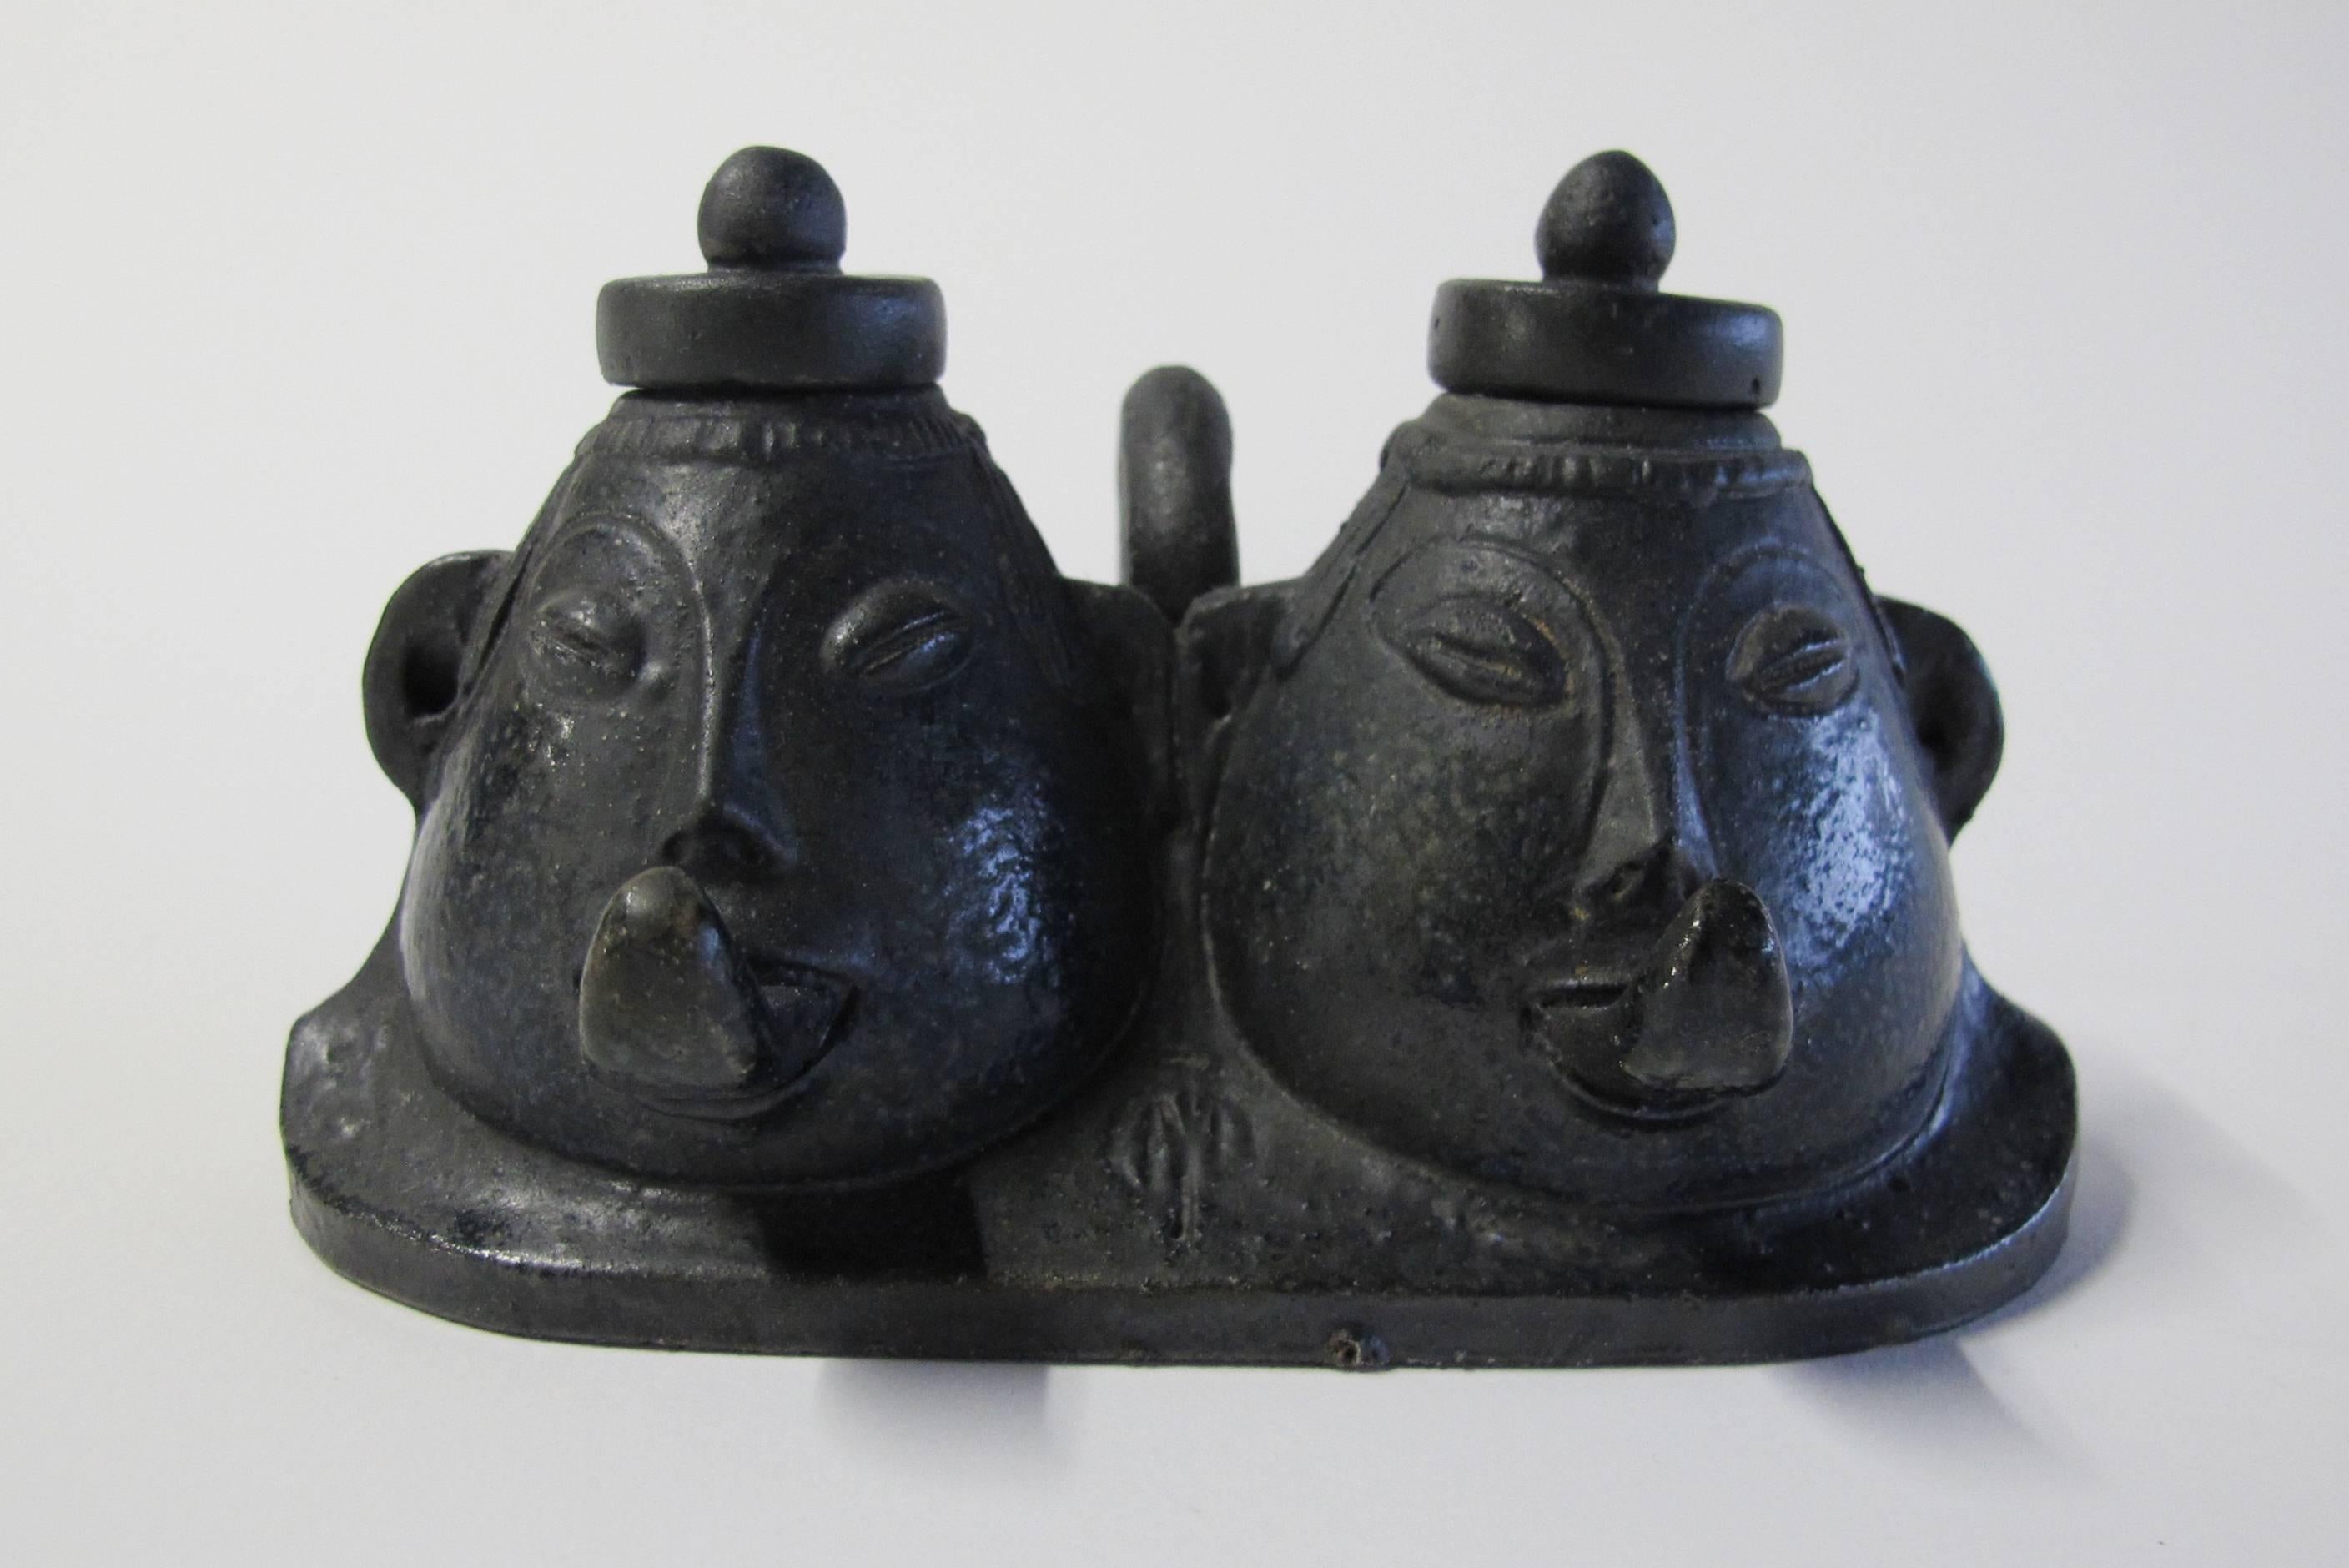 Beautiful inkstand with two inkpots designed by Dutch Art Nouveau artist Joseph Mendes Da Costa. The inkstand is made out of black grès cérame, circa 1900. The inkstand has two pear-shaped grotesque heads out that can be filled with ink. Both heads